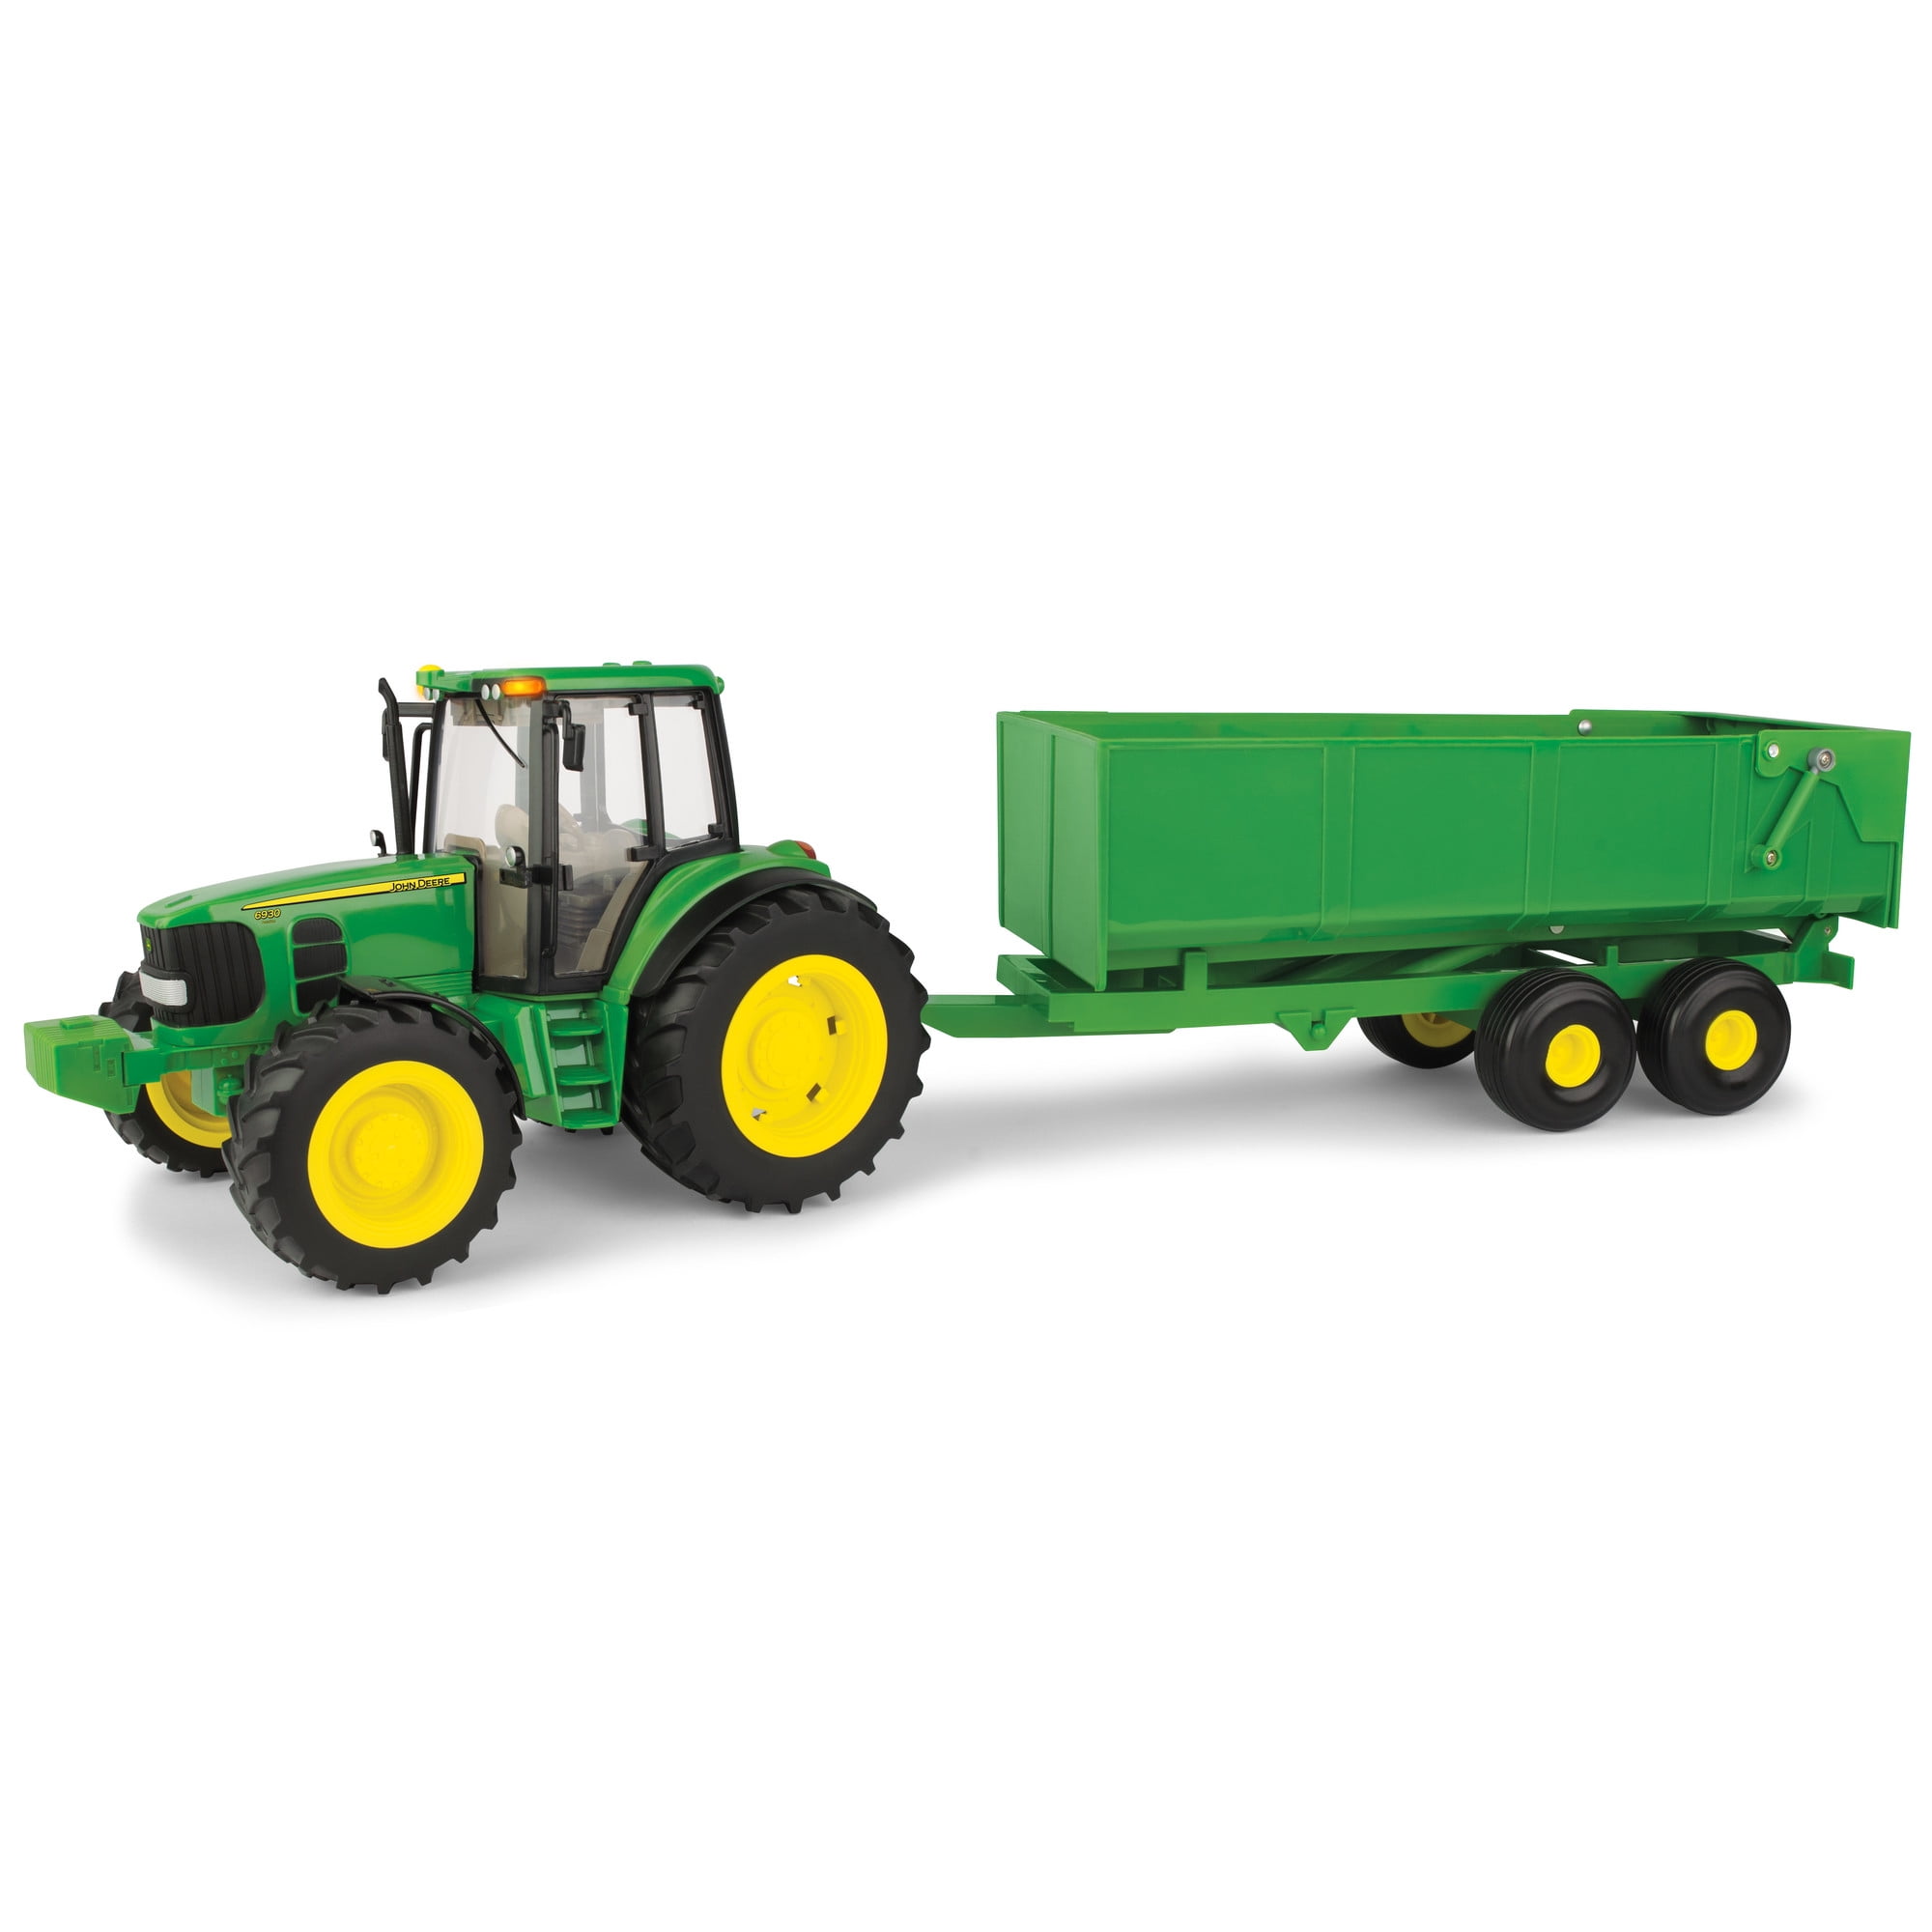 Details about   NEW John Deere Big Farm 7430 Tractor with Gravity Wagon 1/16 Scale LP75986 